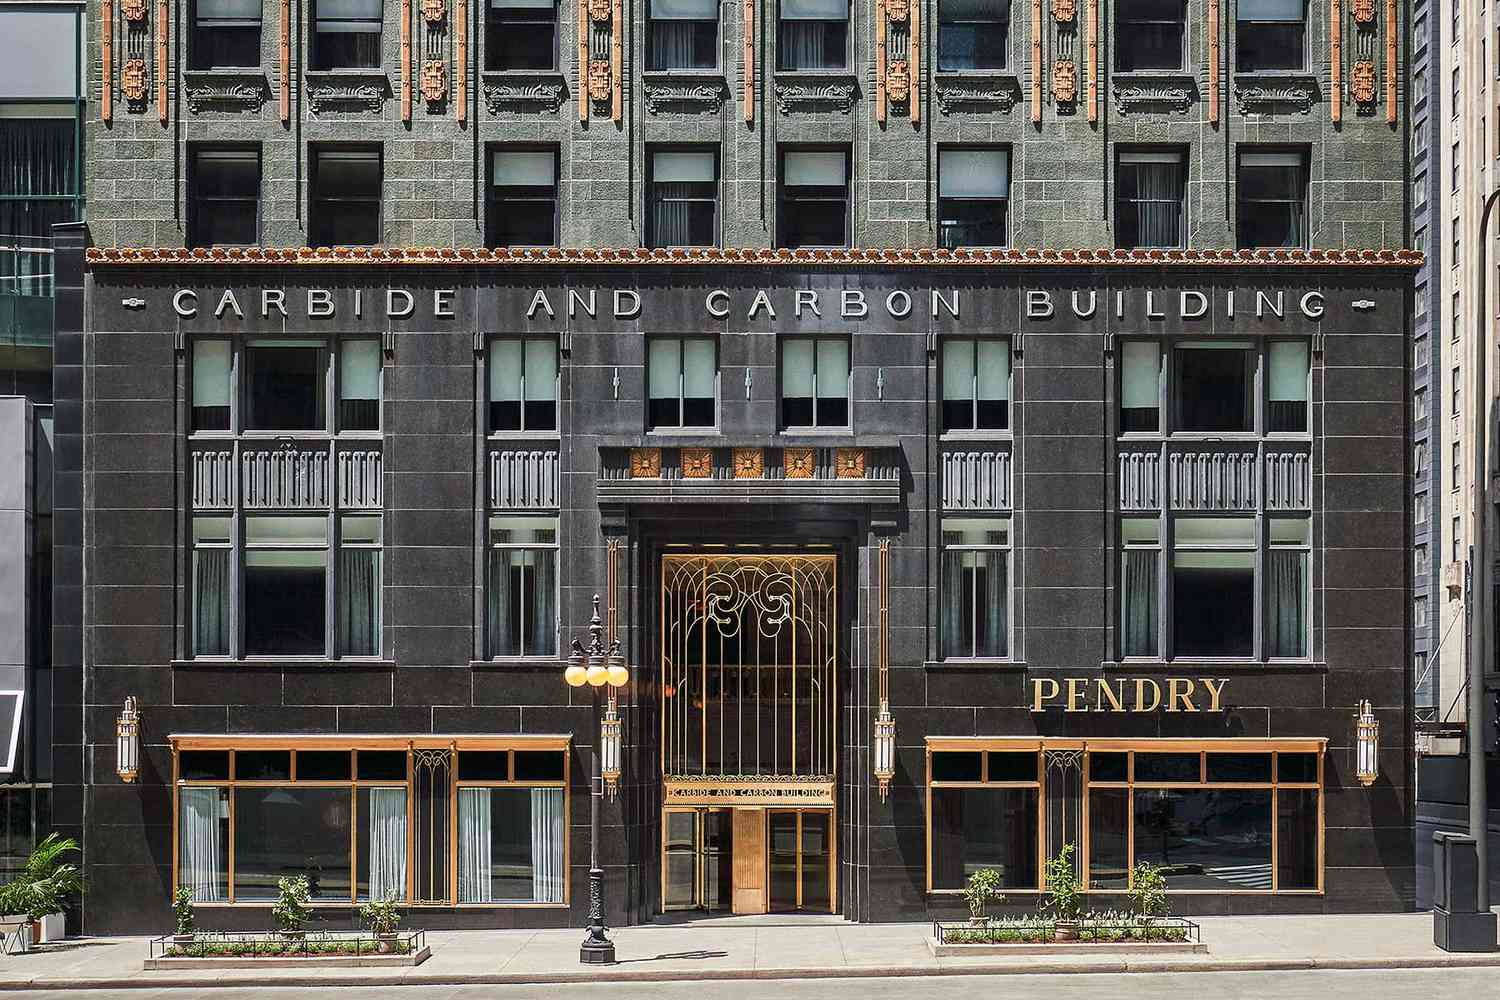 Where To Stay In Chicago: Best Areas And Hotels